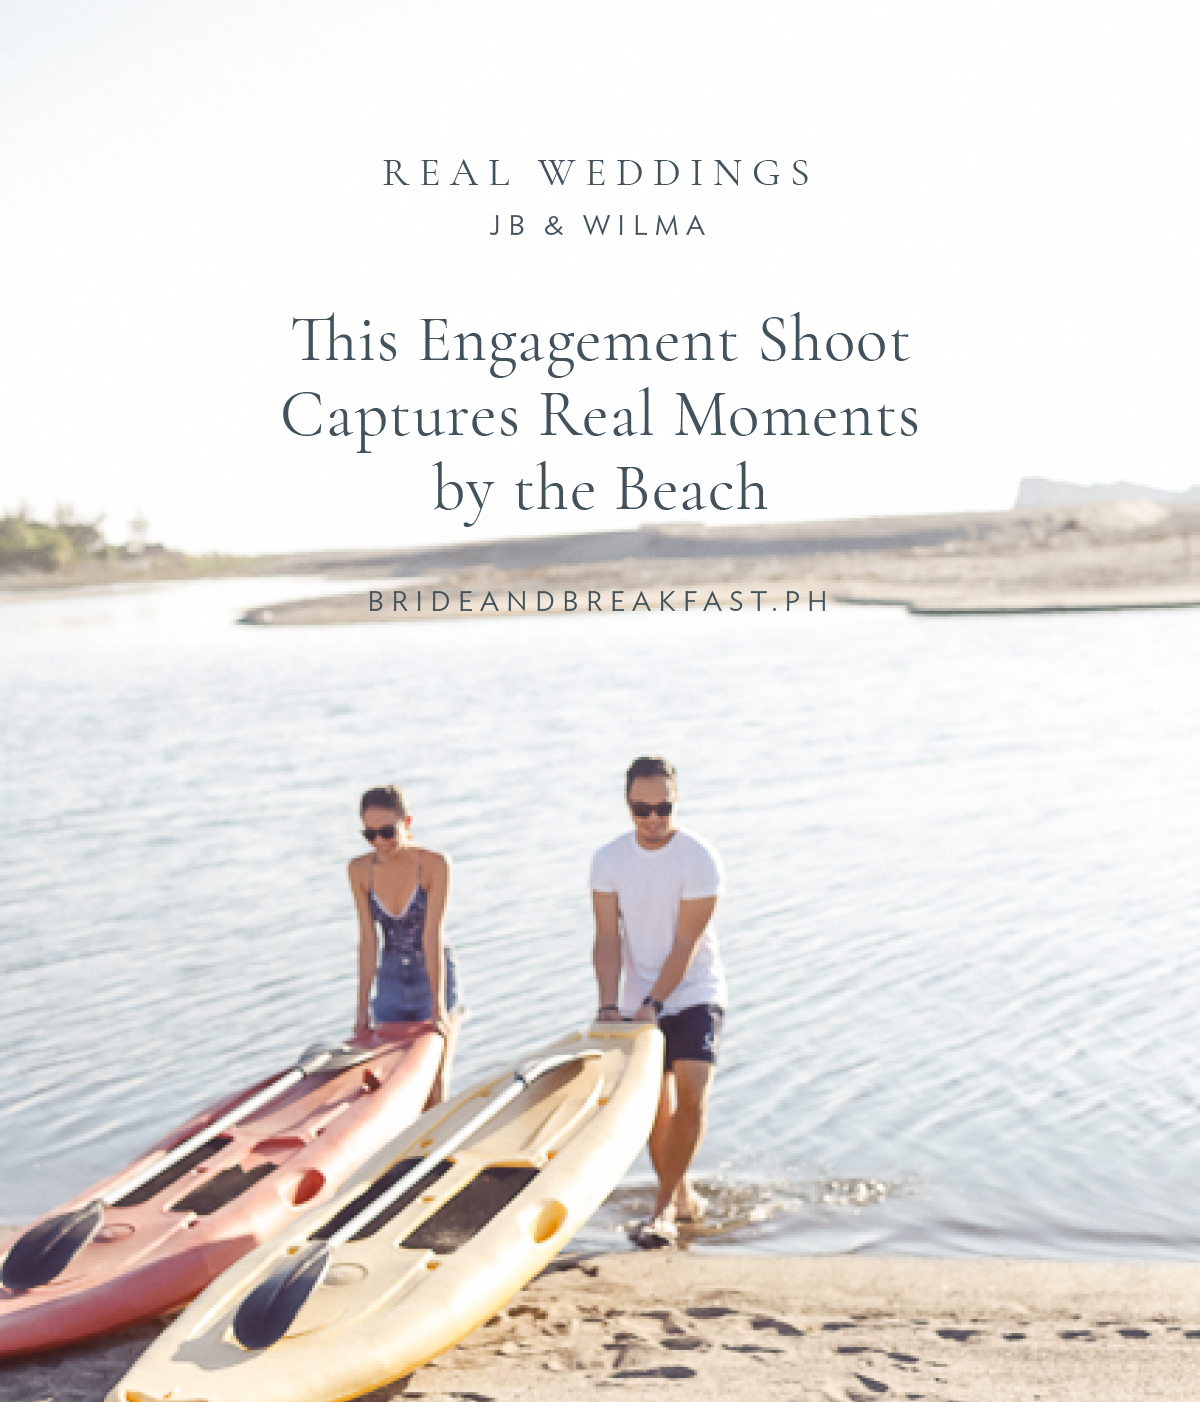 This Engagement Shoot Captures Real Moments by the Beach